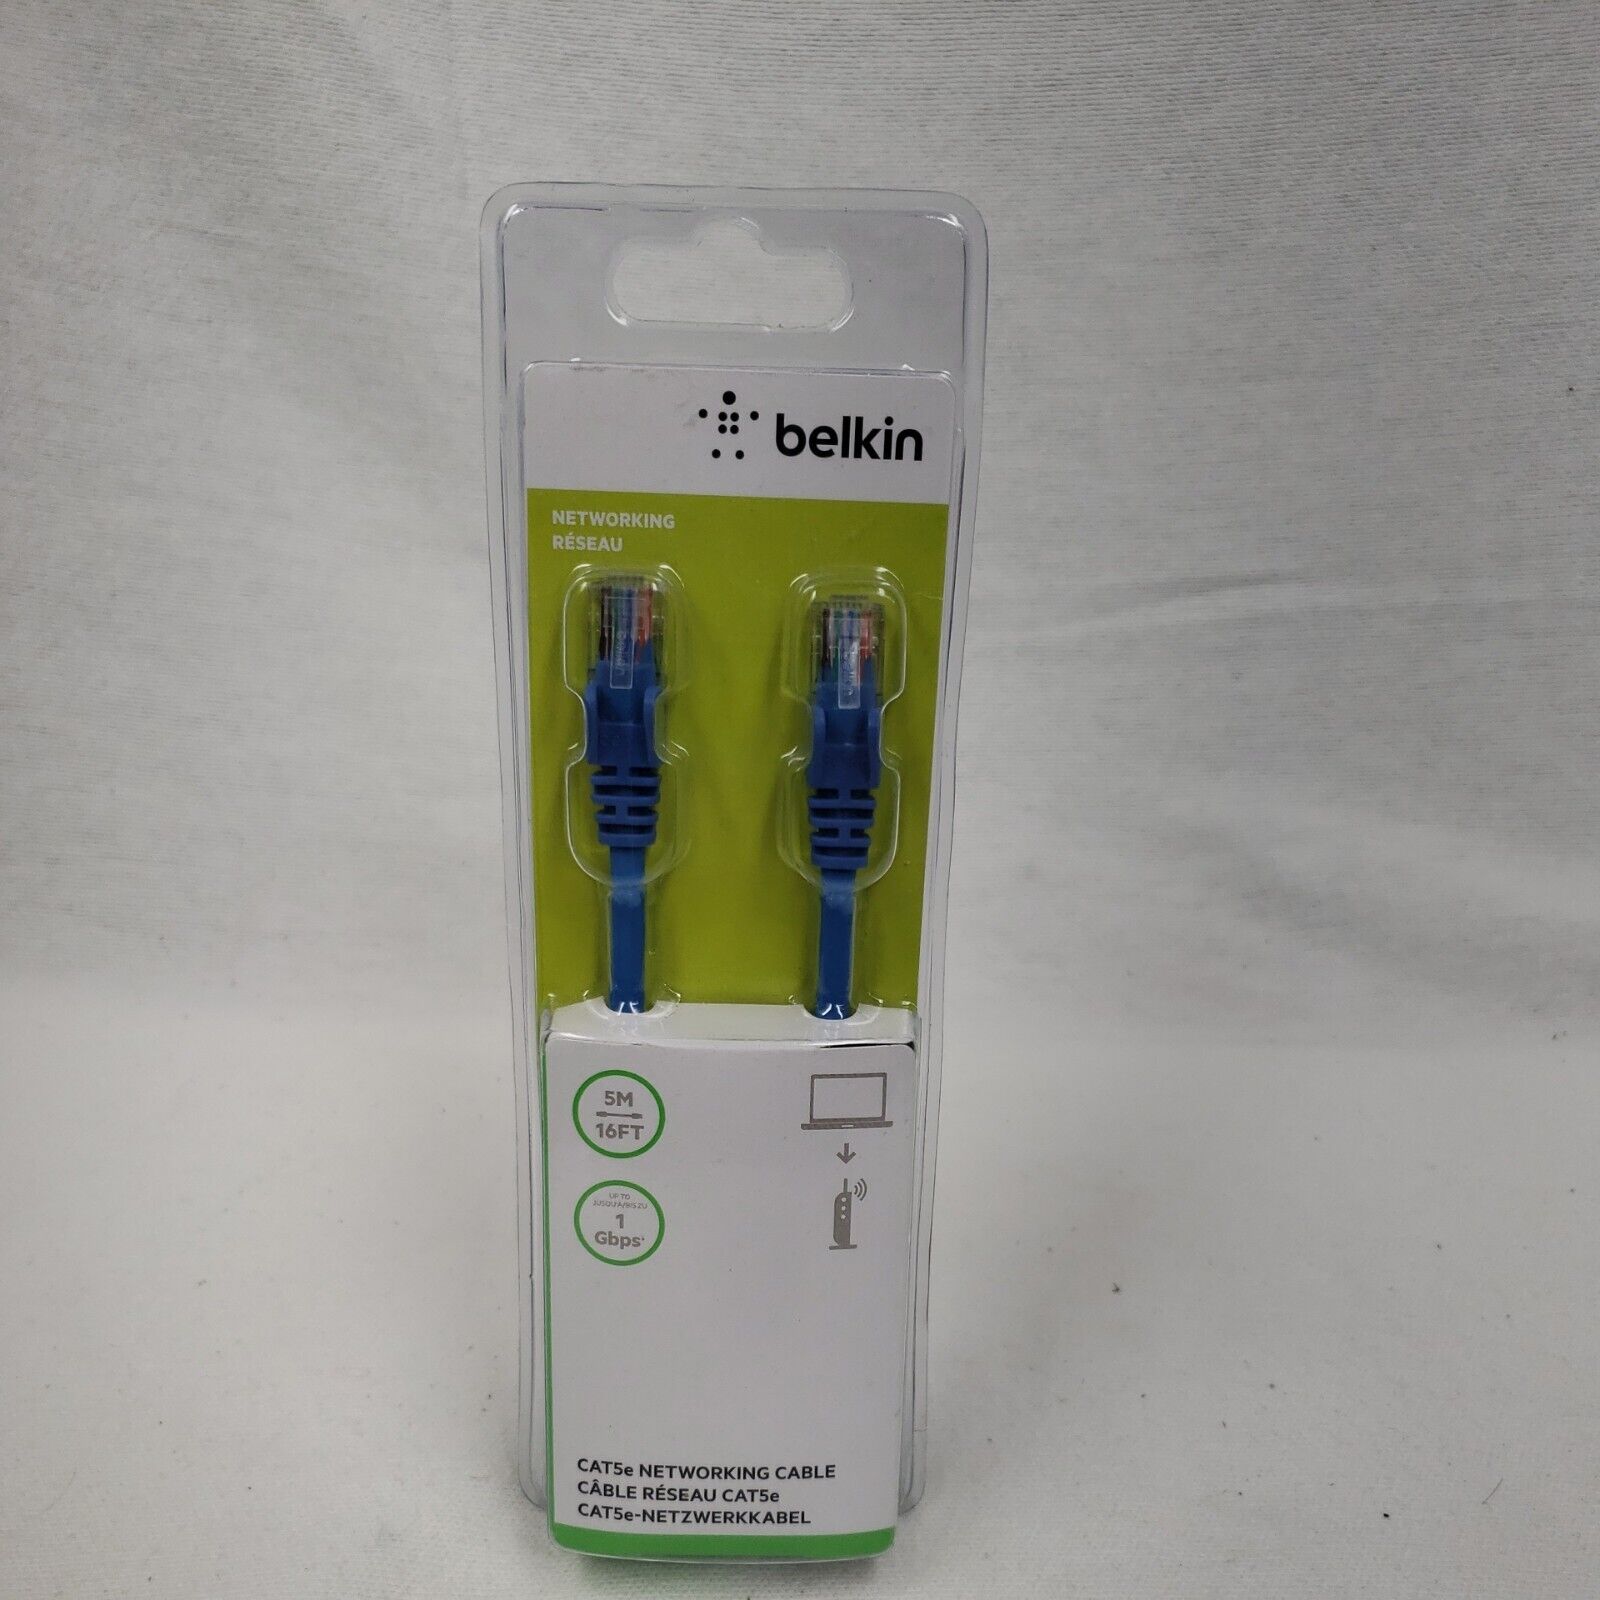 Belkin 5M/16 Feet Blue Cat5e Networking Cable, 1 Gbps.Authentic, sealed. 